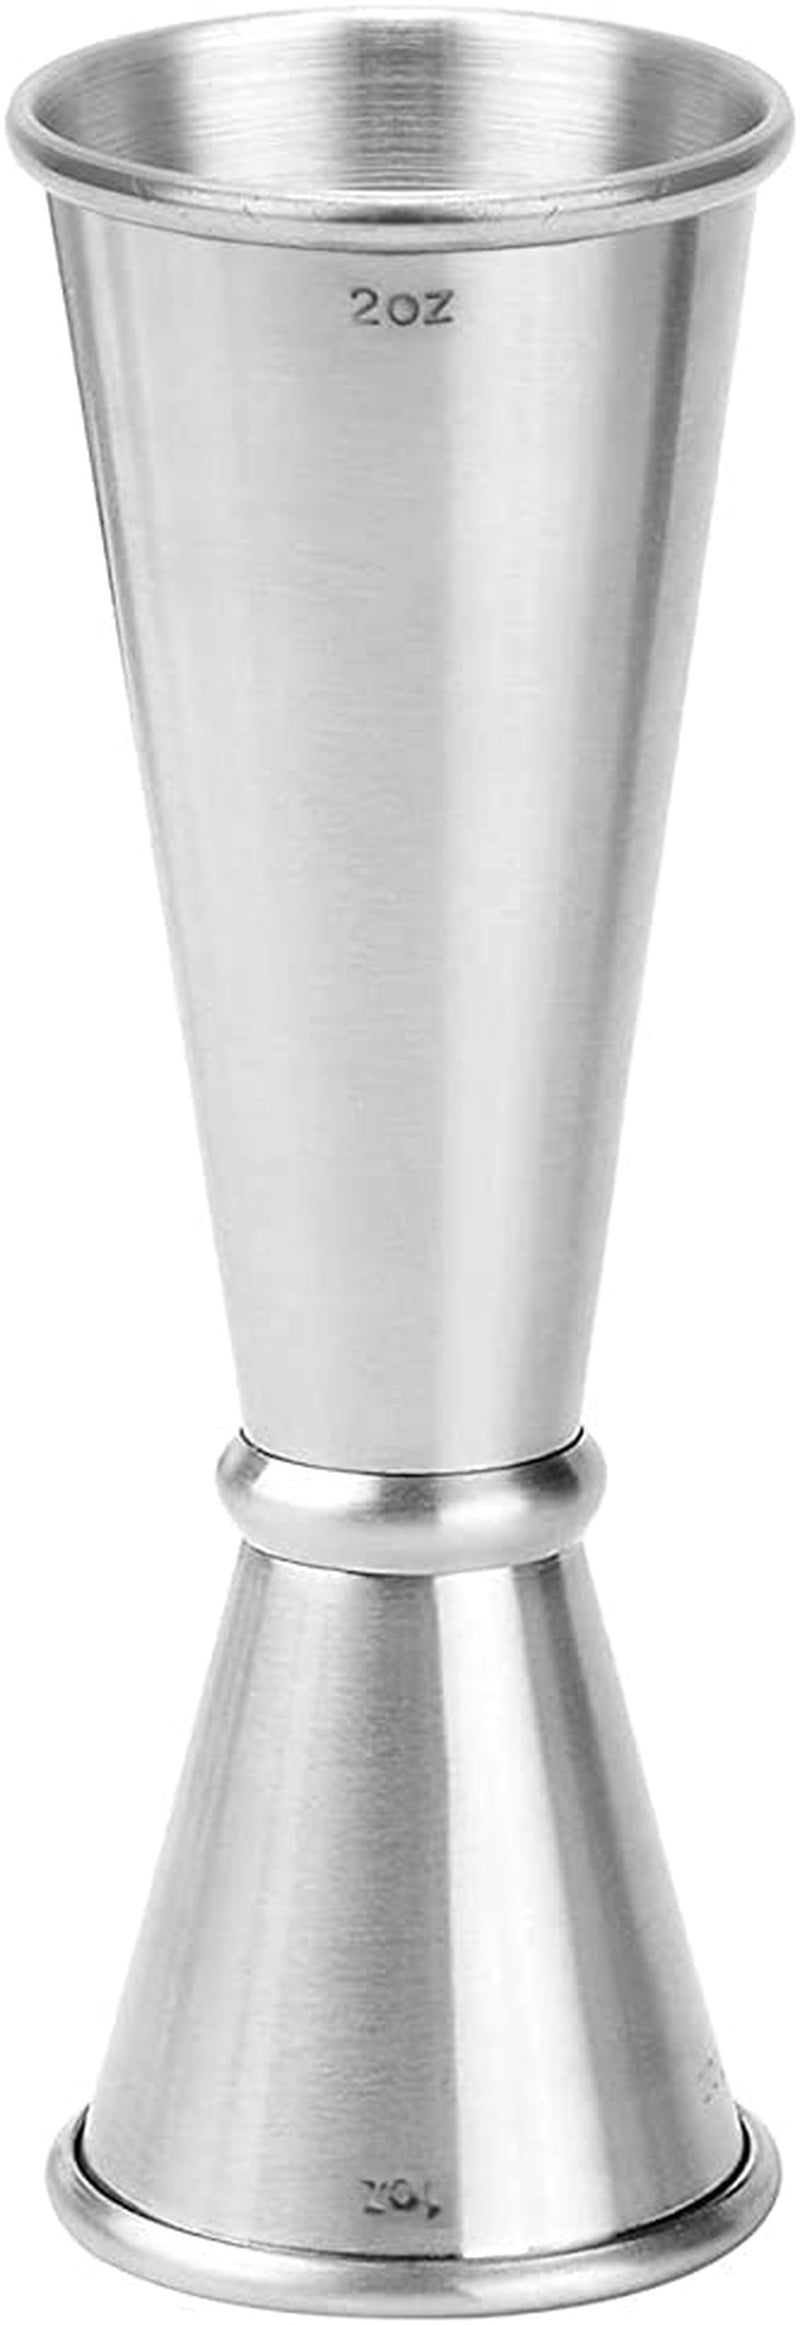 Cocktail Jigger for Bartending - Japanese Double Sided Jigger with Measurements Inside, 2 Oz 1 Oz Stainless Steel Measuring Jigger Home & Garden > Kitchen & Dining > Barware Barfroee   